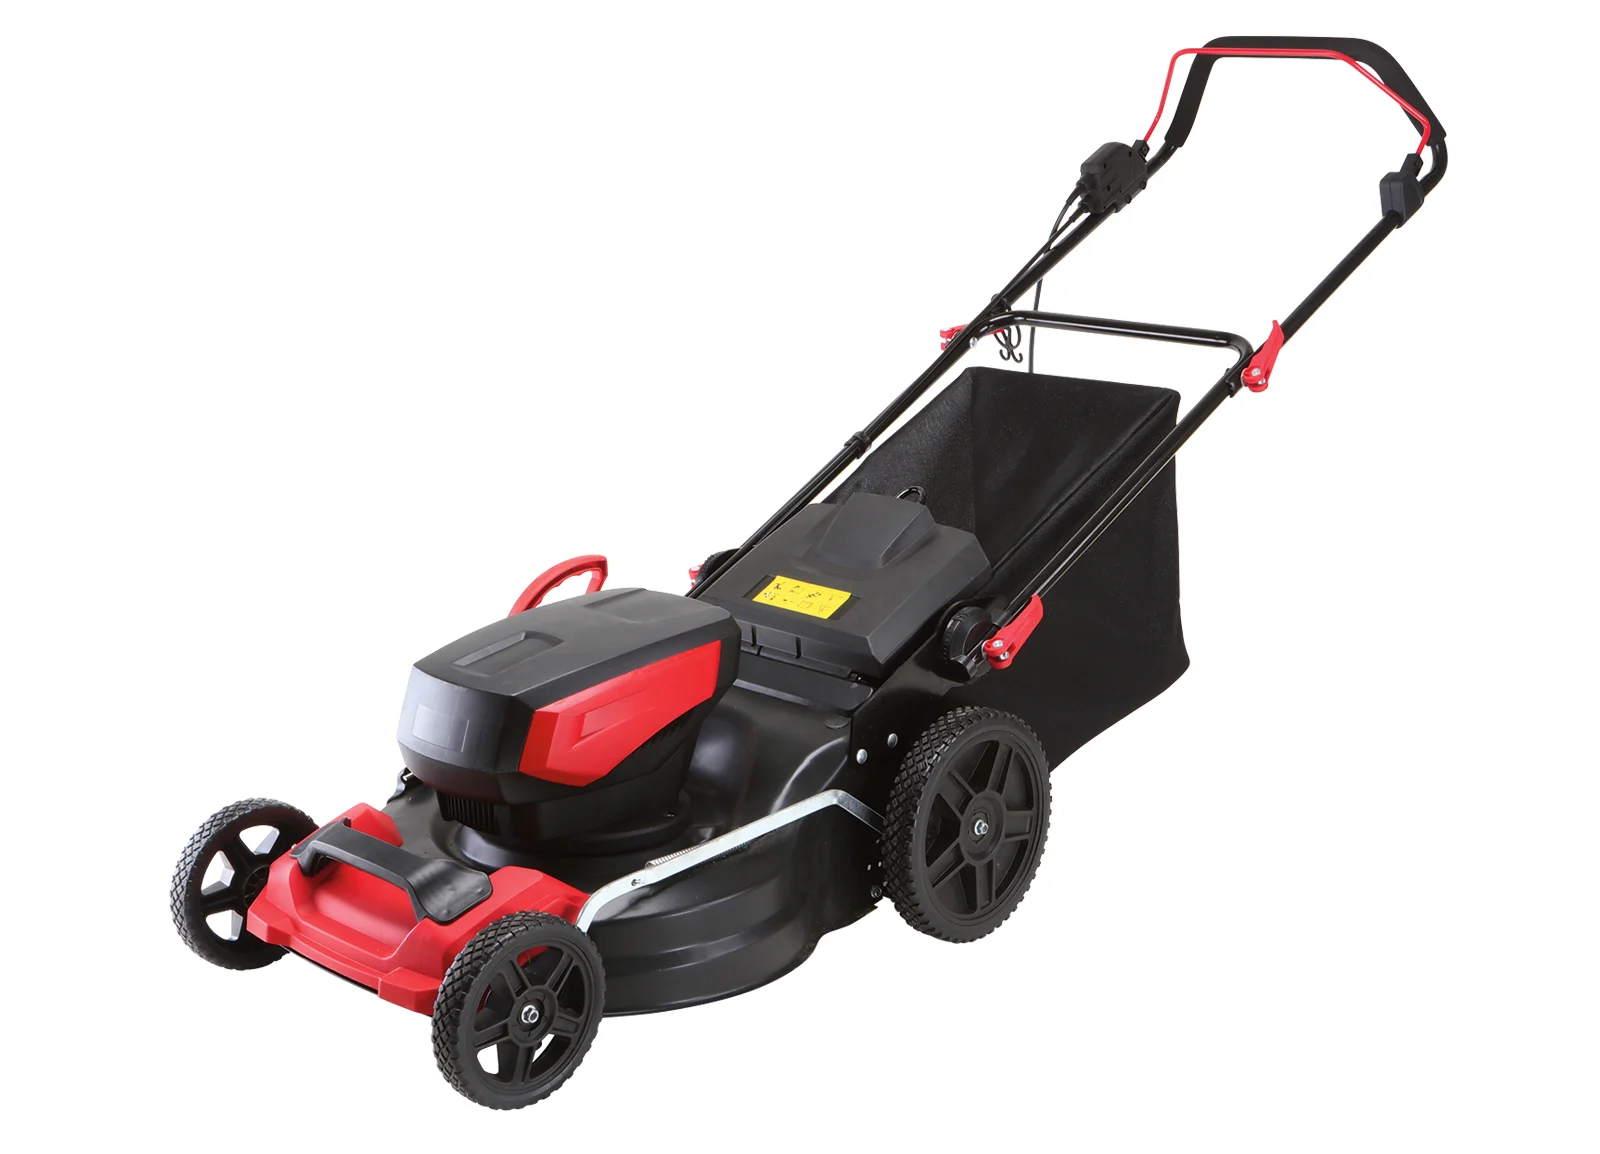 Lawn Mowers: Electric, Self Propelled, Gas & Cordless